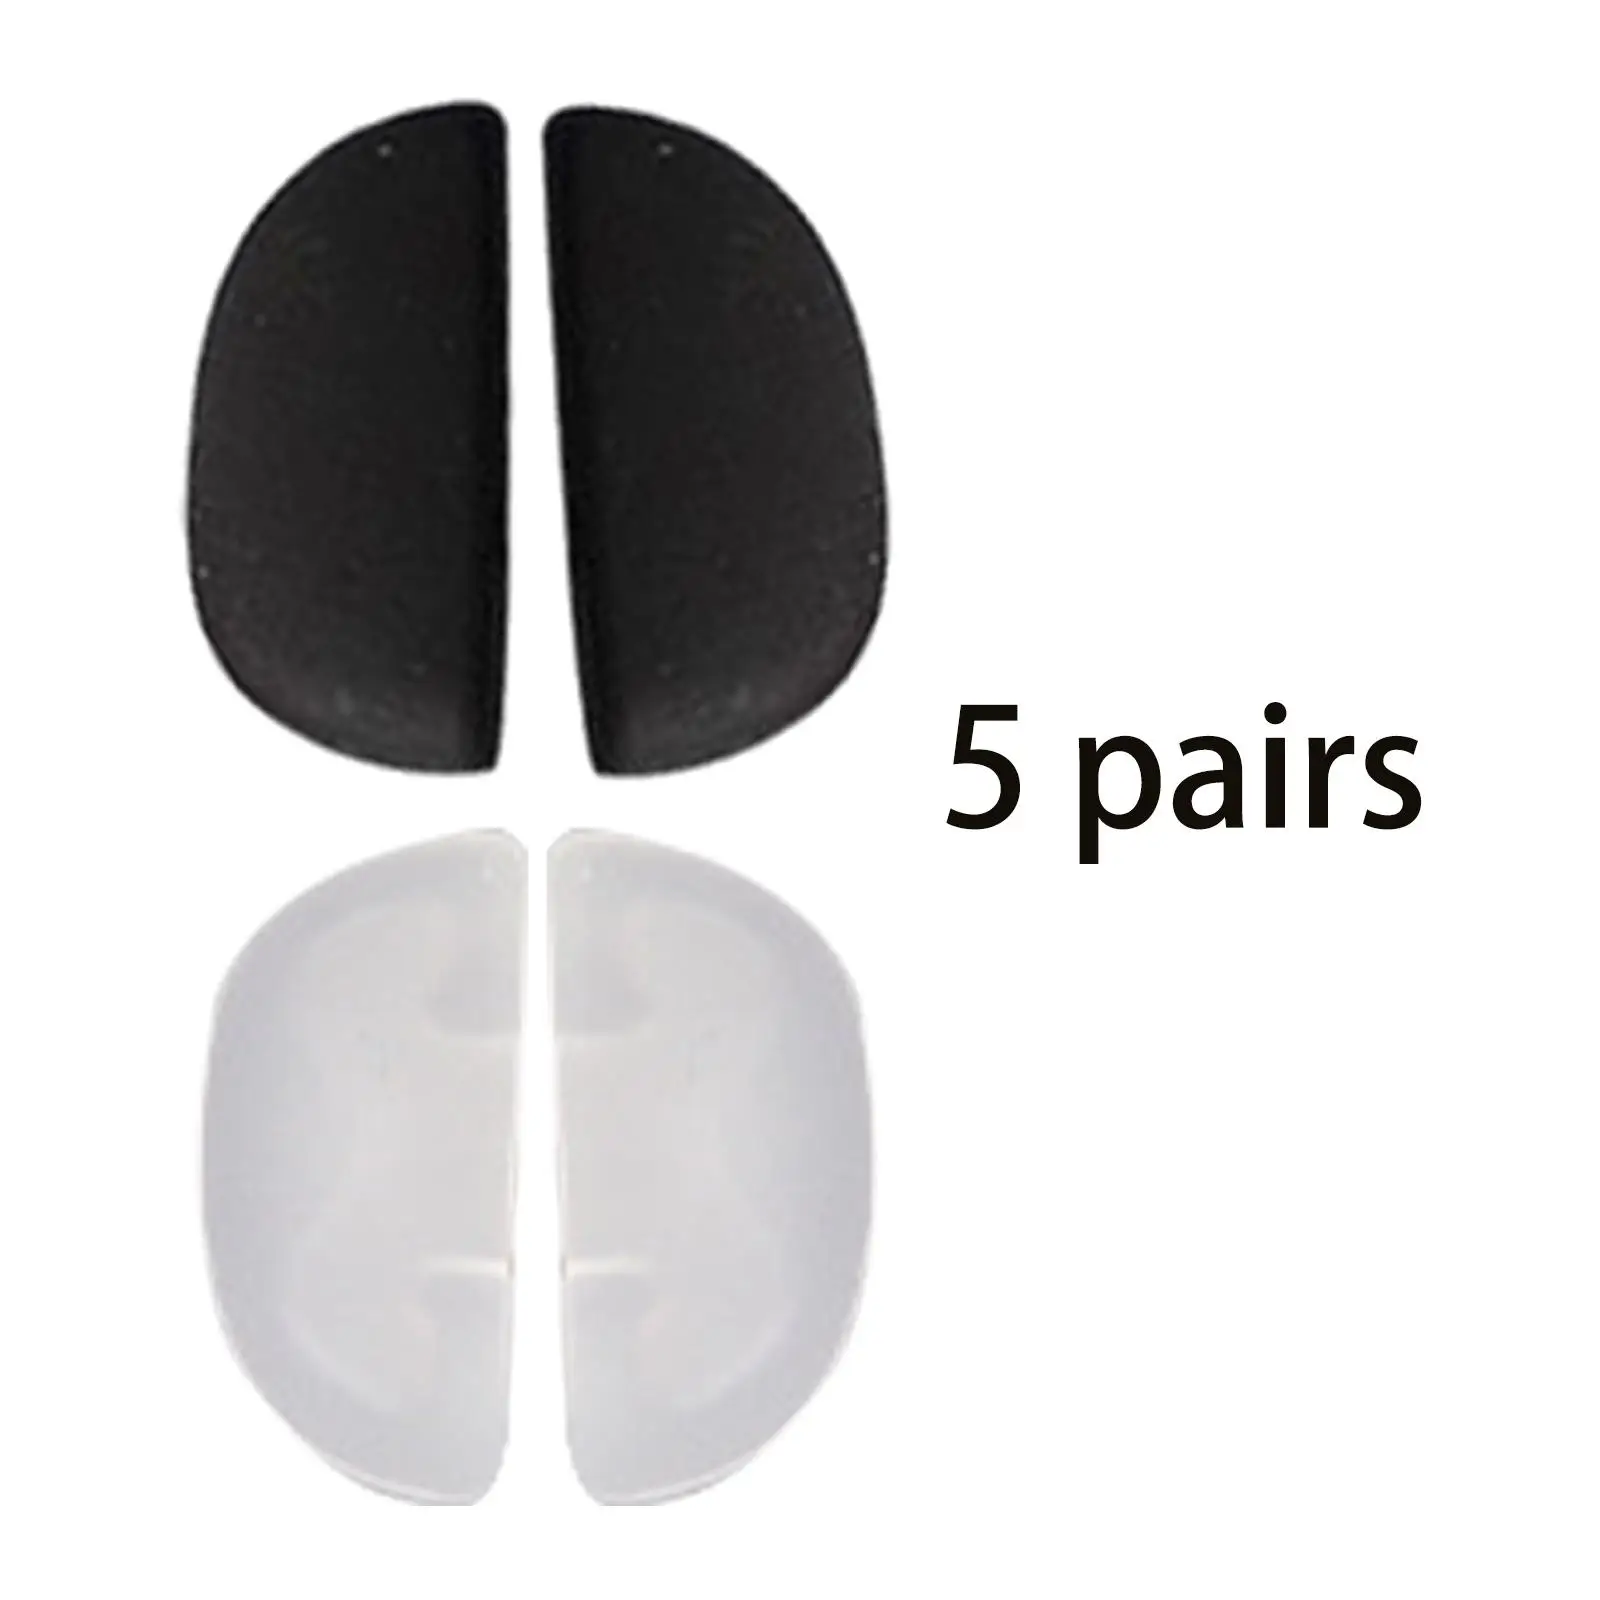 10 Pieces Silicone Children Eyeglass Nose Pads Replacement Anti Slip Comfortable Slide/Push in Thickened Contoured for Eyewear